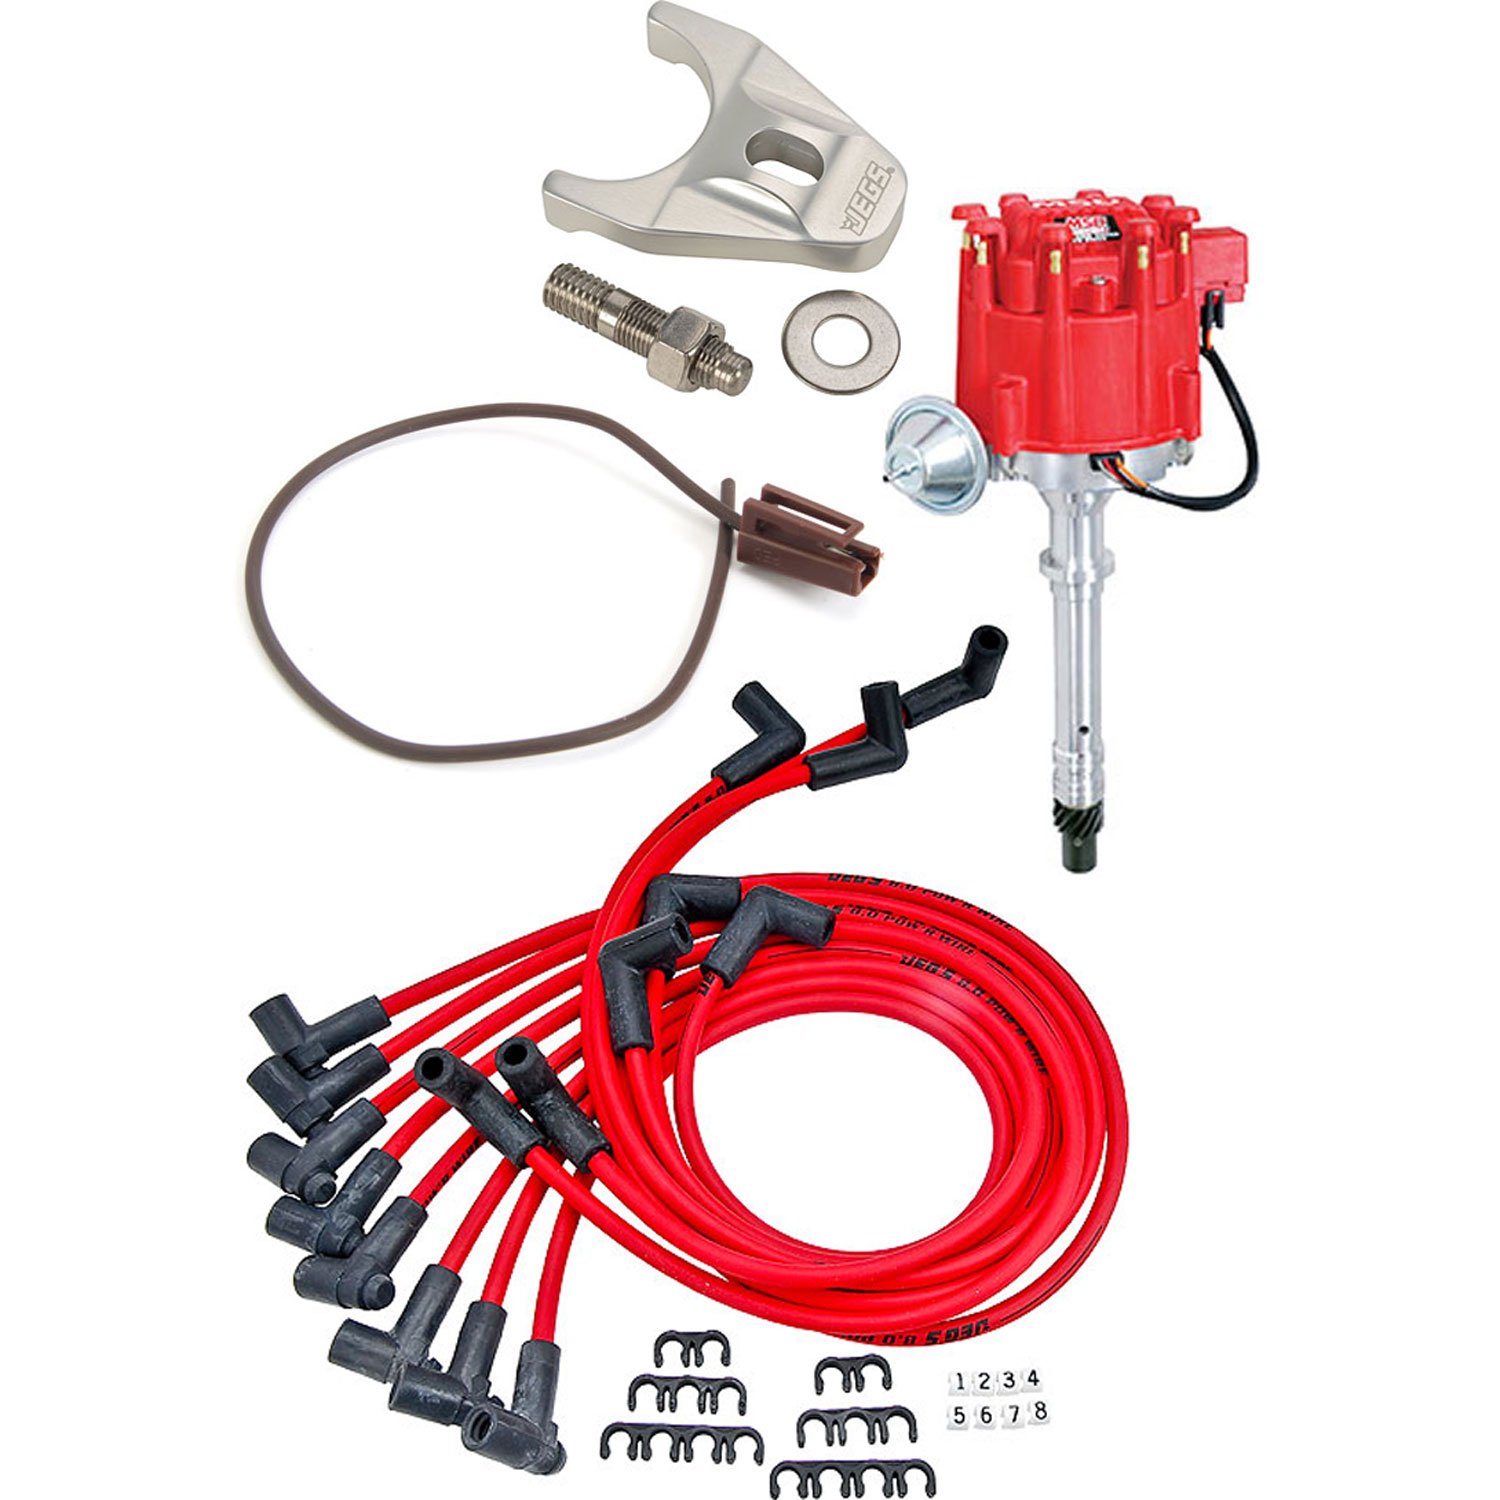 Chevy HEI Ignition System Kit Small Block Chevy